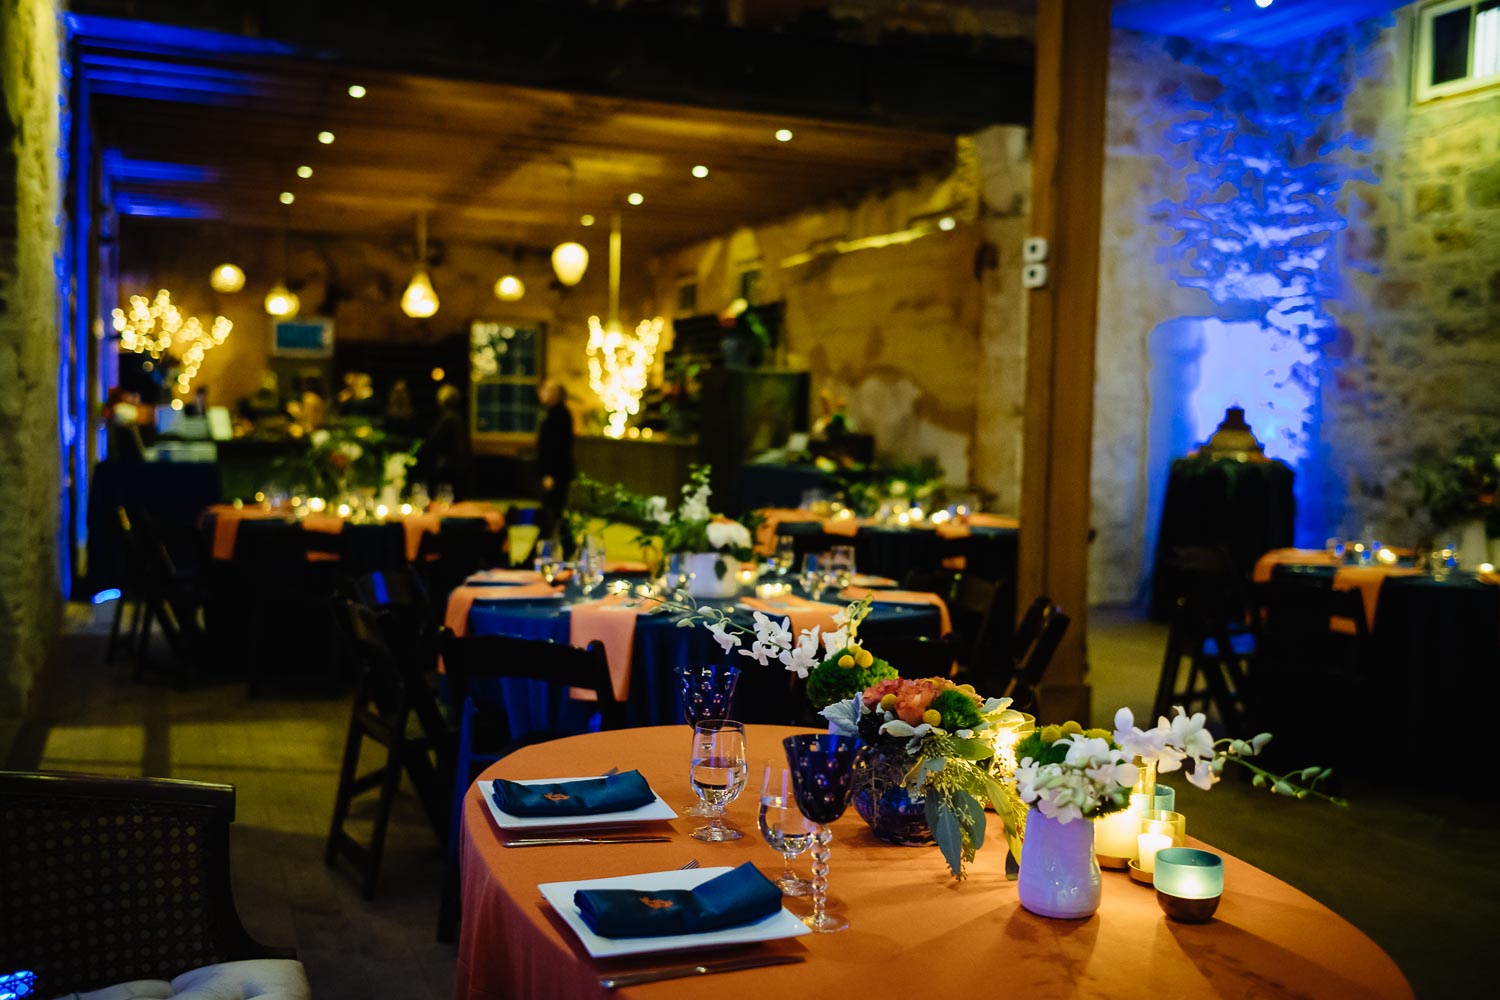 Decor and details of wedding reception at Ingenhuett on High Comfort LM104420